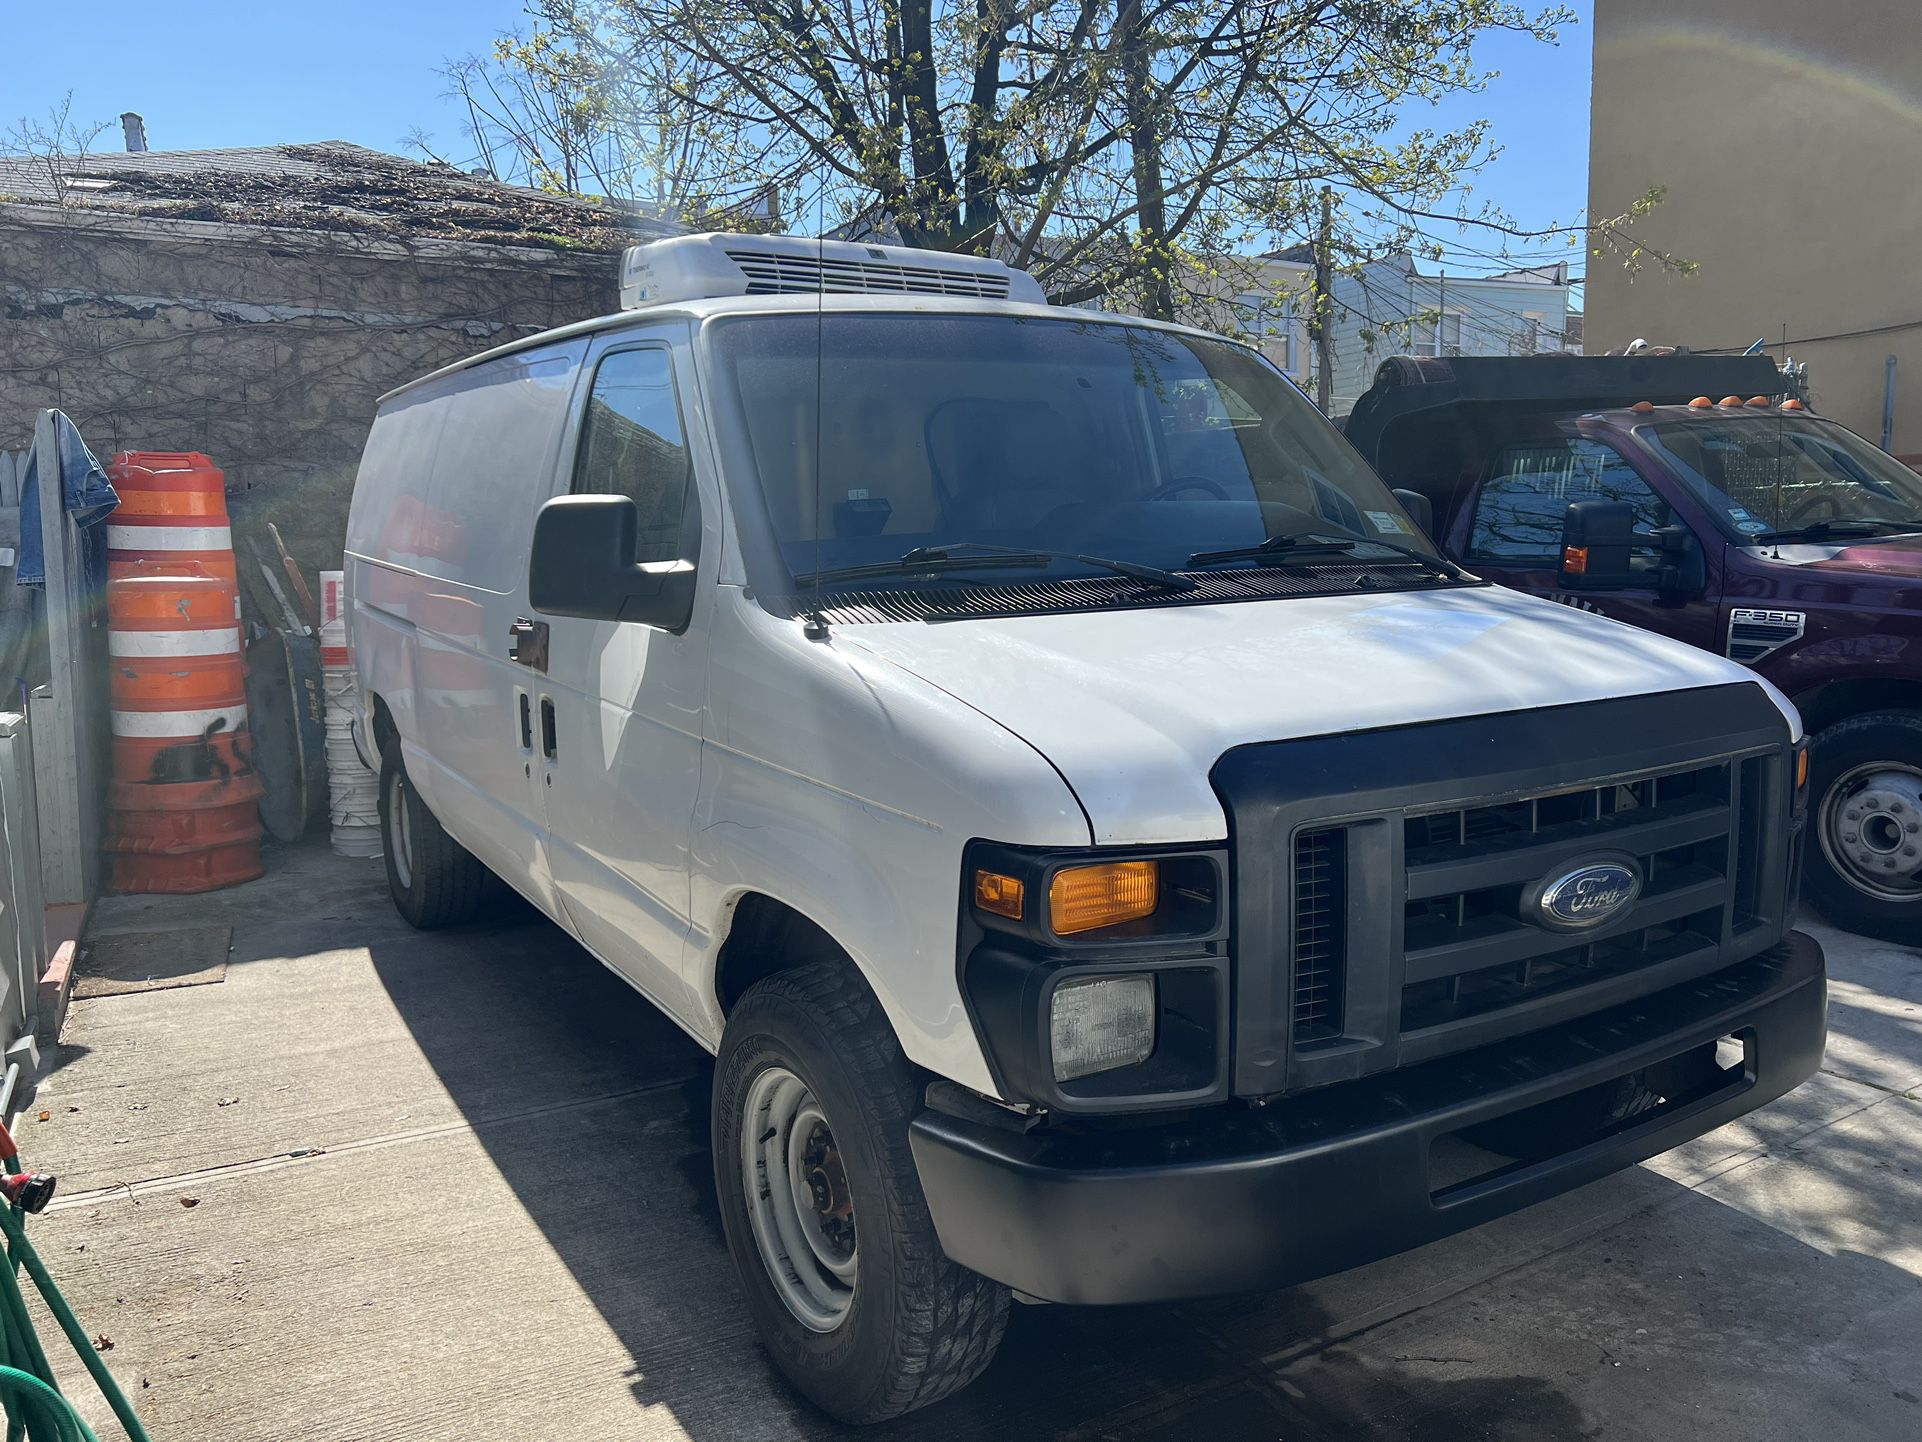 2010 Ford E-250 for Sale in Brooklyn, NY - OfferUp